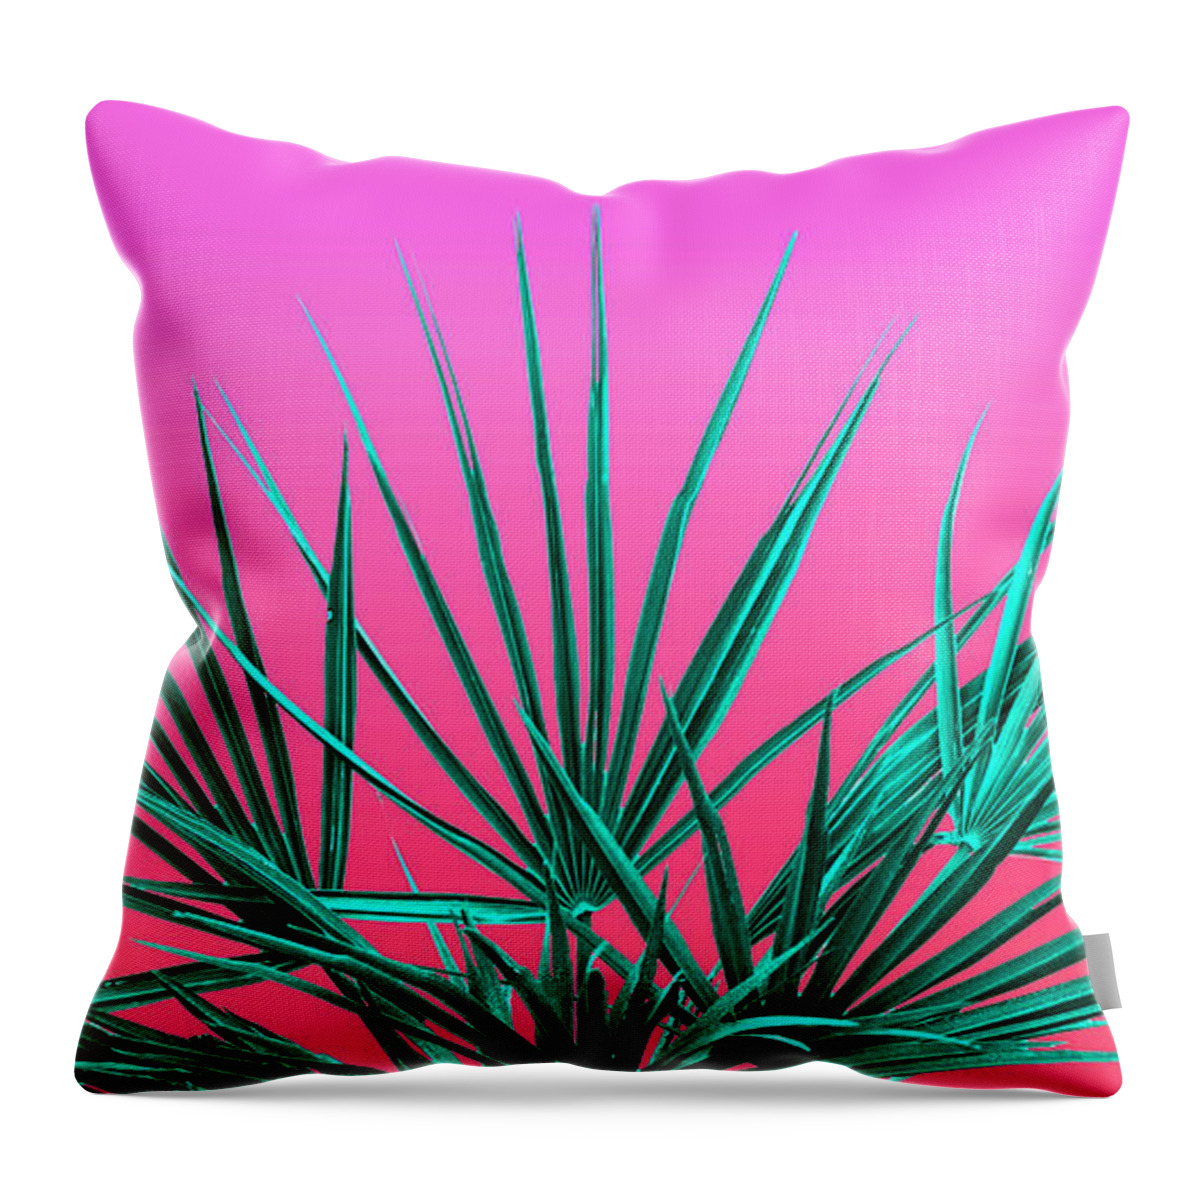 Vaporwave Throw Pillow featuring the photograph Pink Palm Life - Miami Vaporwave by Jennifer Walsh